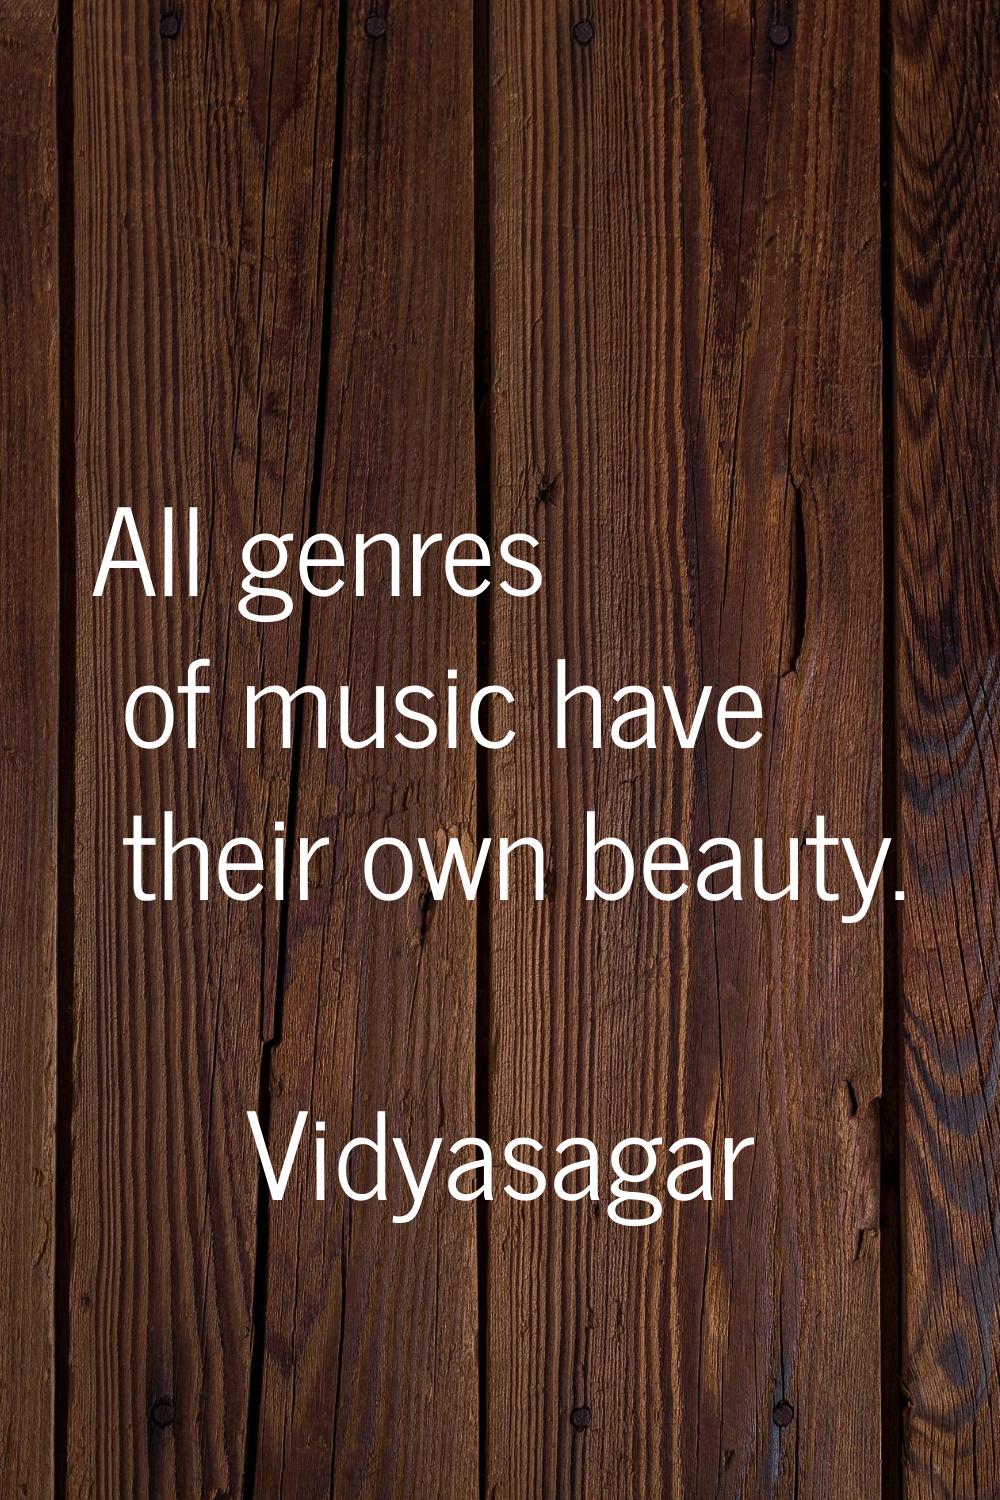 All genres of music have their own beauty.